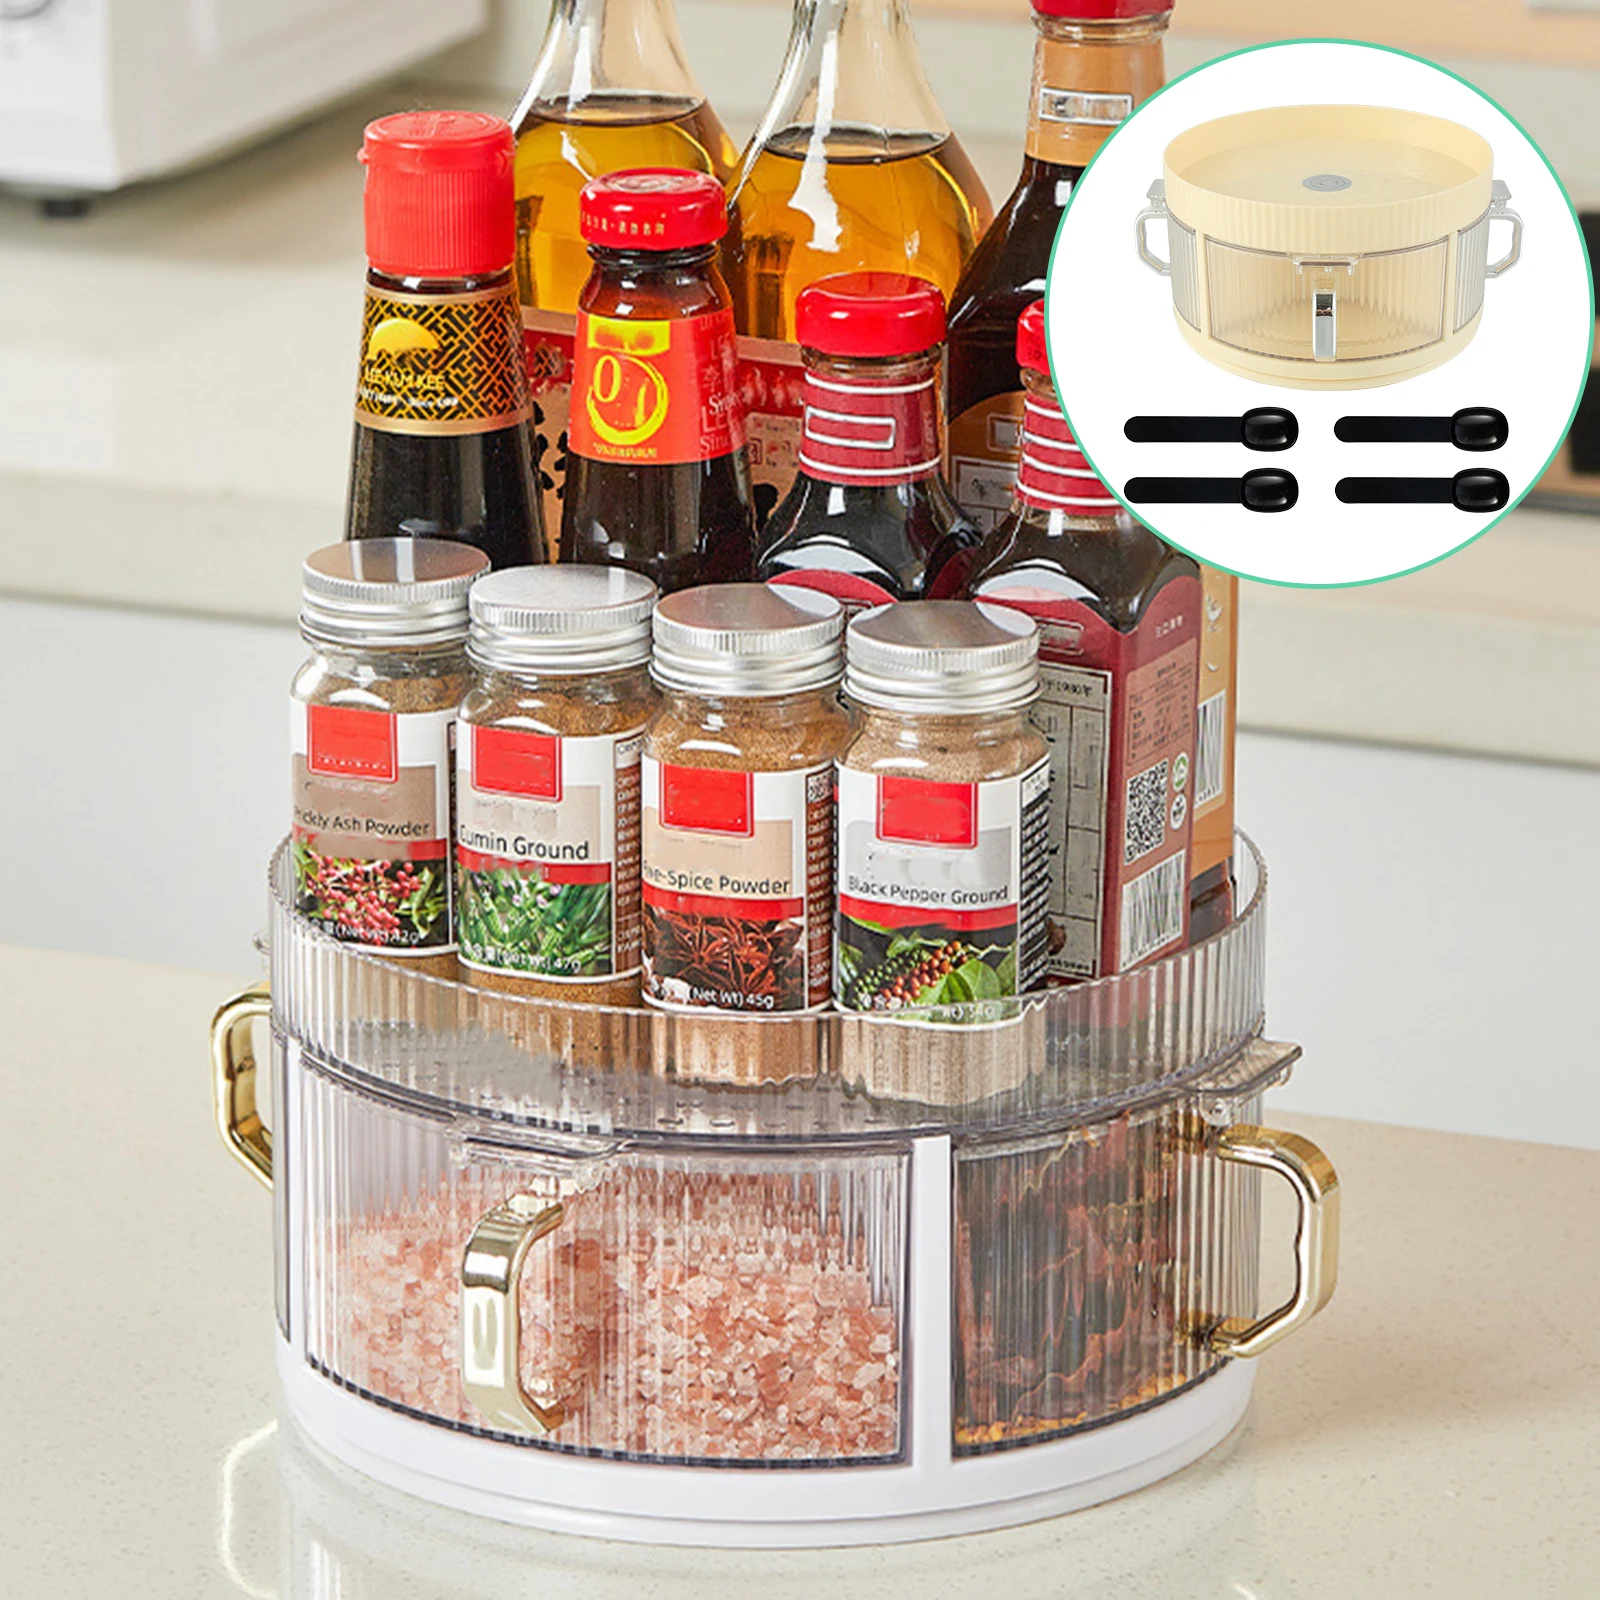 

2-Tier Lazy Susan Spice Rack 360° Rotatable Spice Racks Rotating Turntable Organizer with 4 Removable Divided Bins 2 in 1